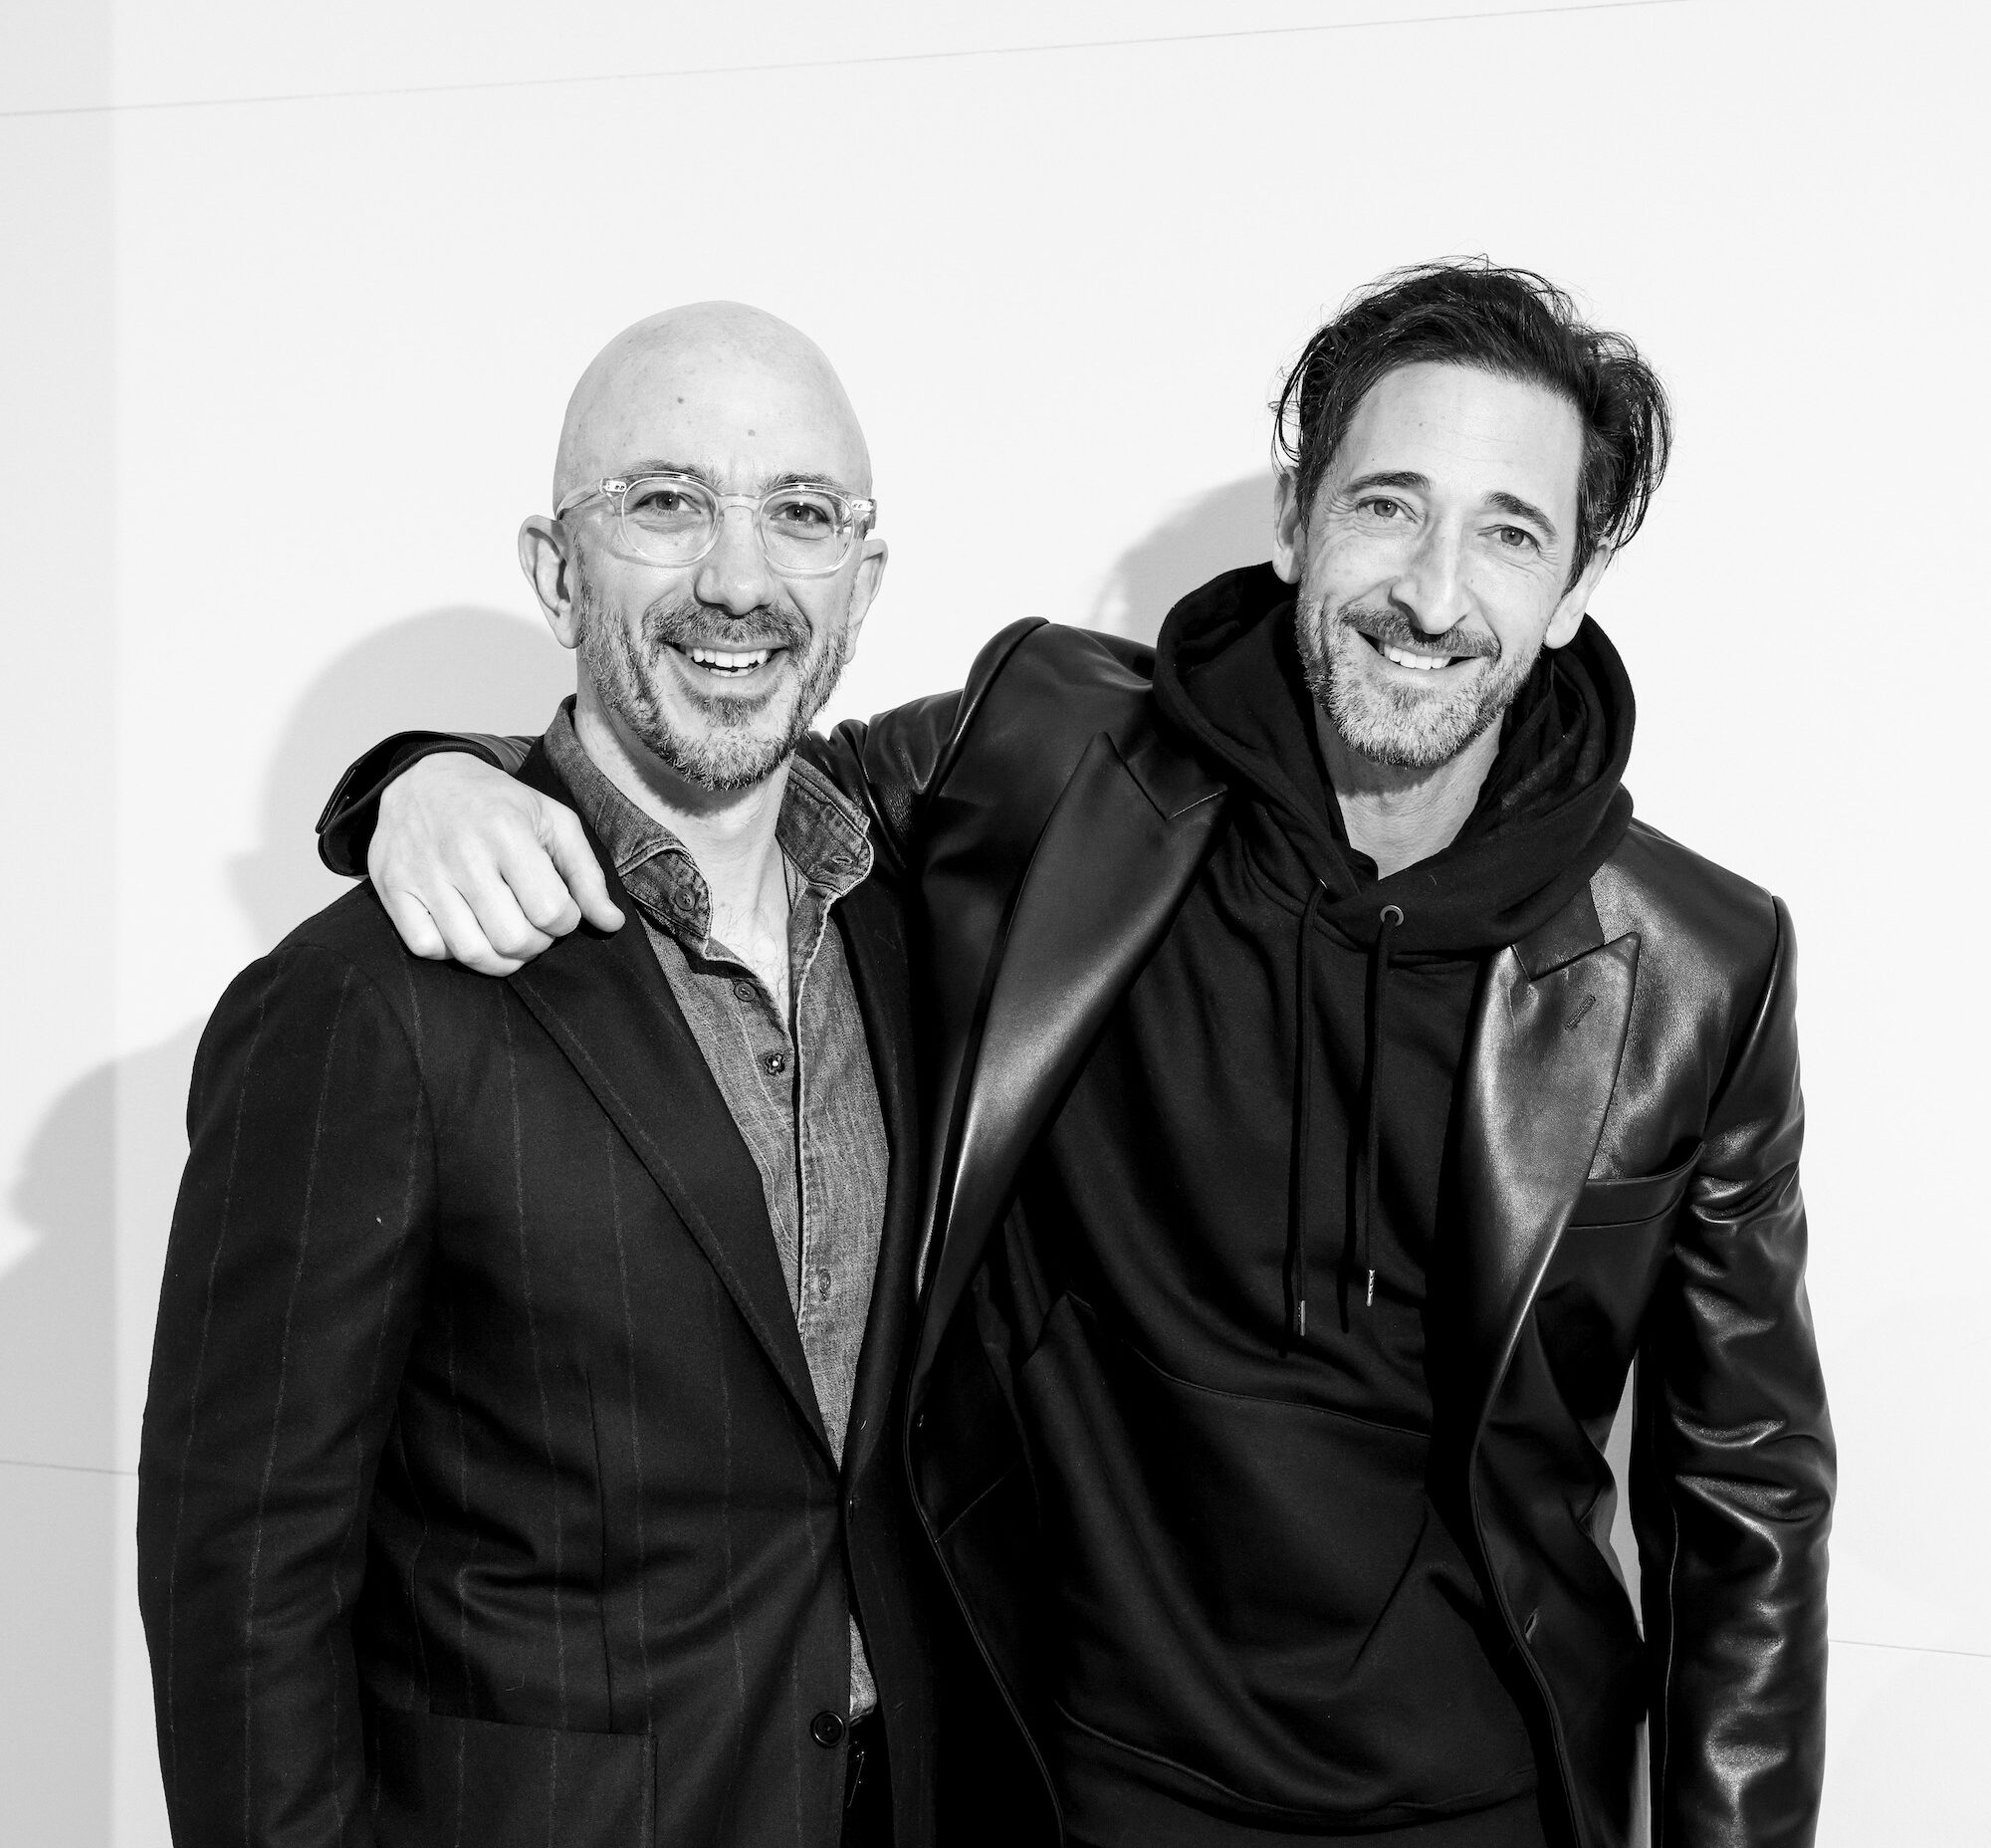 Oscar-winning actor Adrien Brody will design a series of capsule collections for Bally